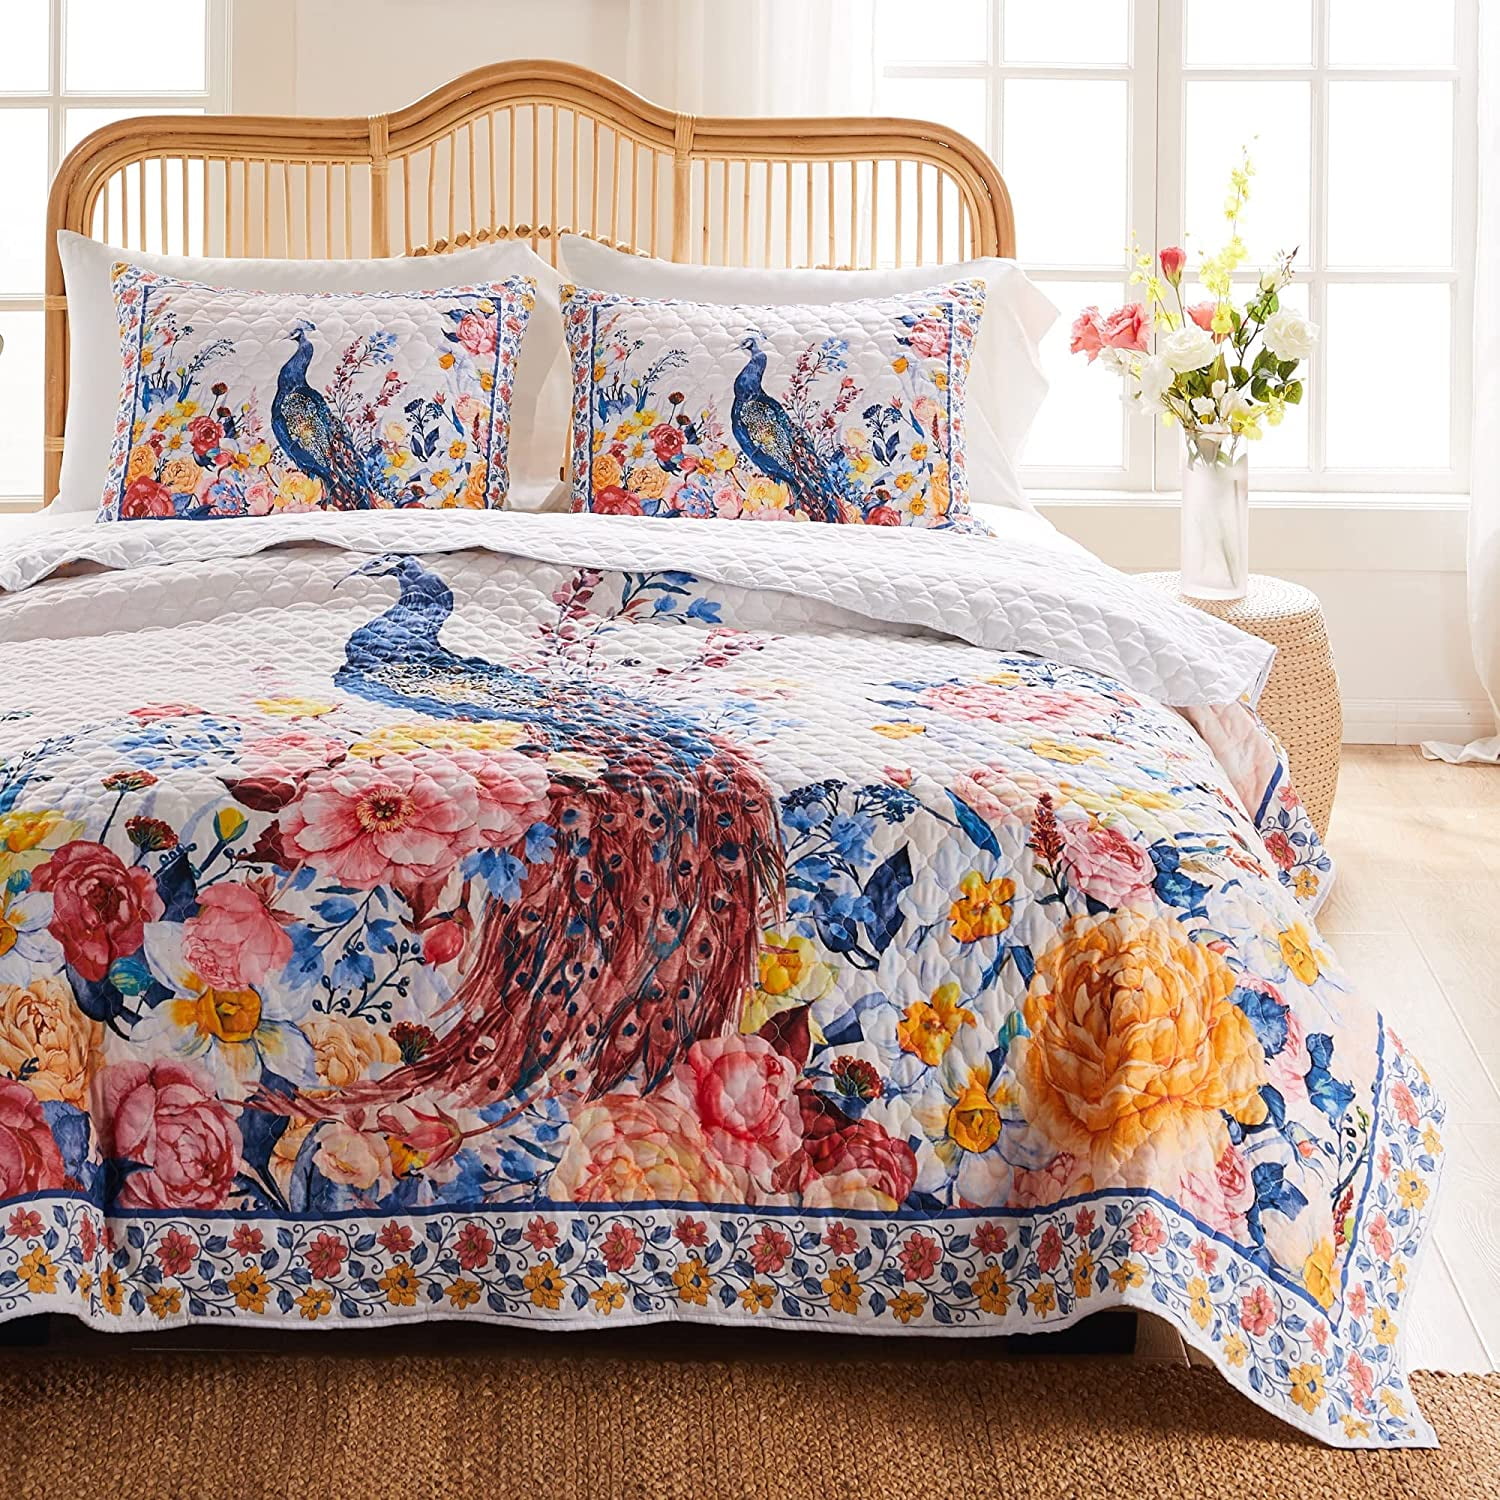 Details about   Beige Peacock Kantha Quilt Bedspread Throw Cotton Blanket Twin/Queen/King Size 